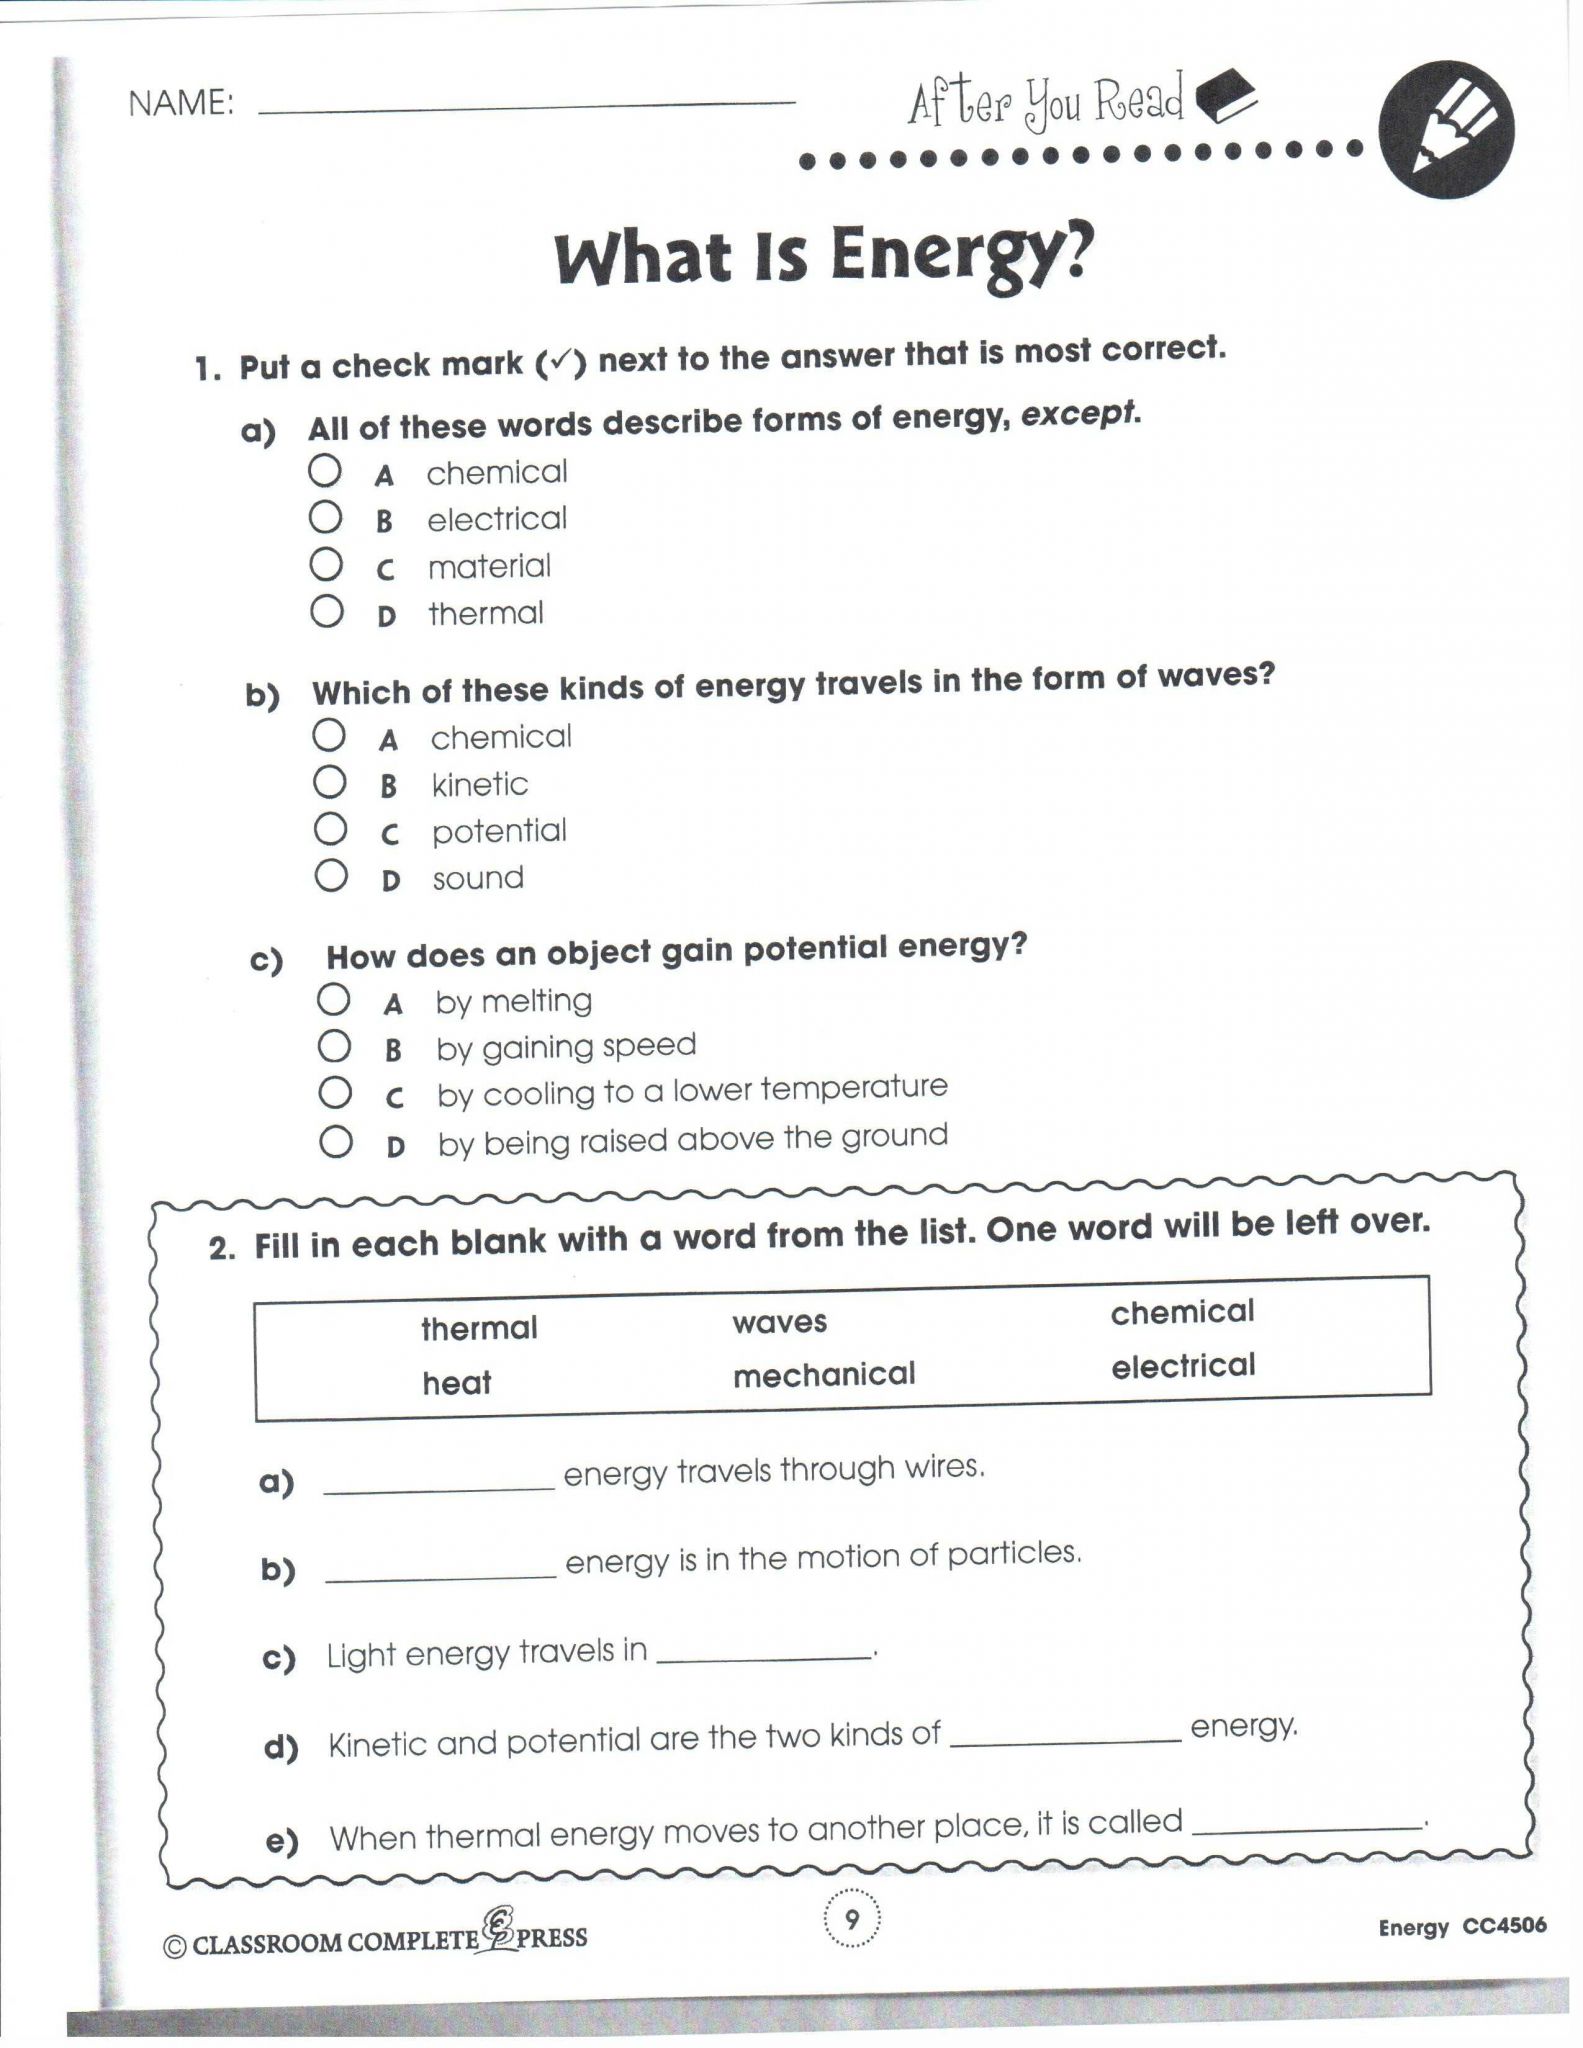 Build An atom Simulation Worksheet Answers with Work and Power Worksheet Answers Gallery Worksheet for Kids In English